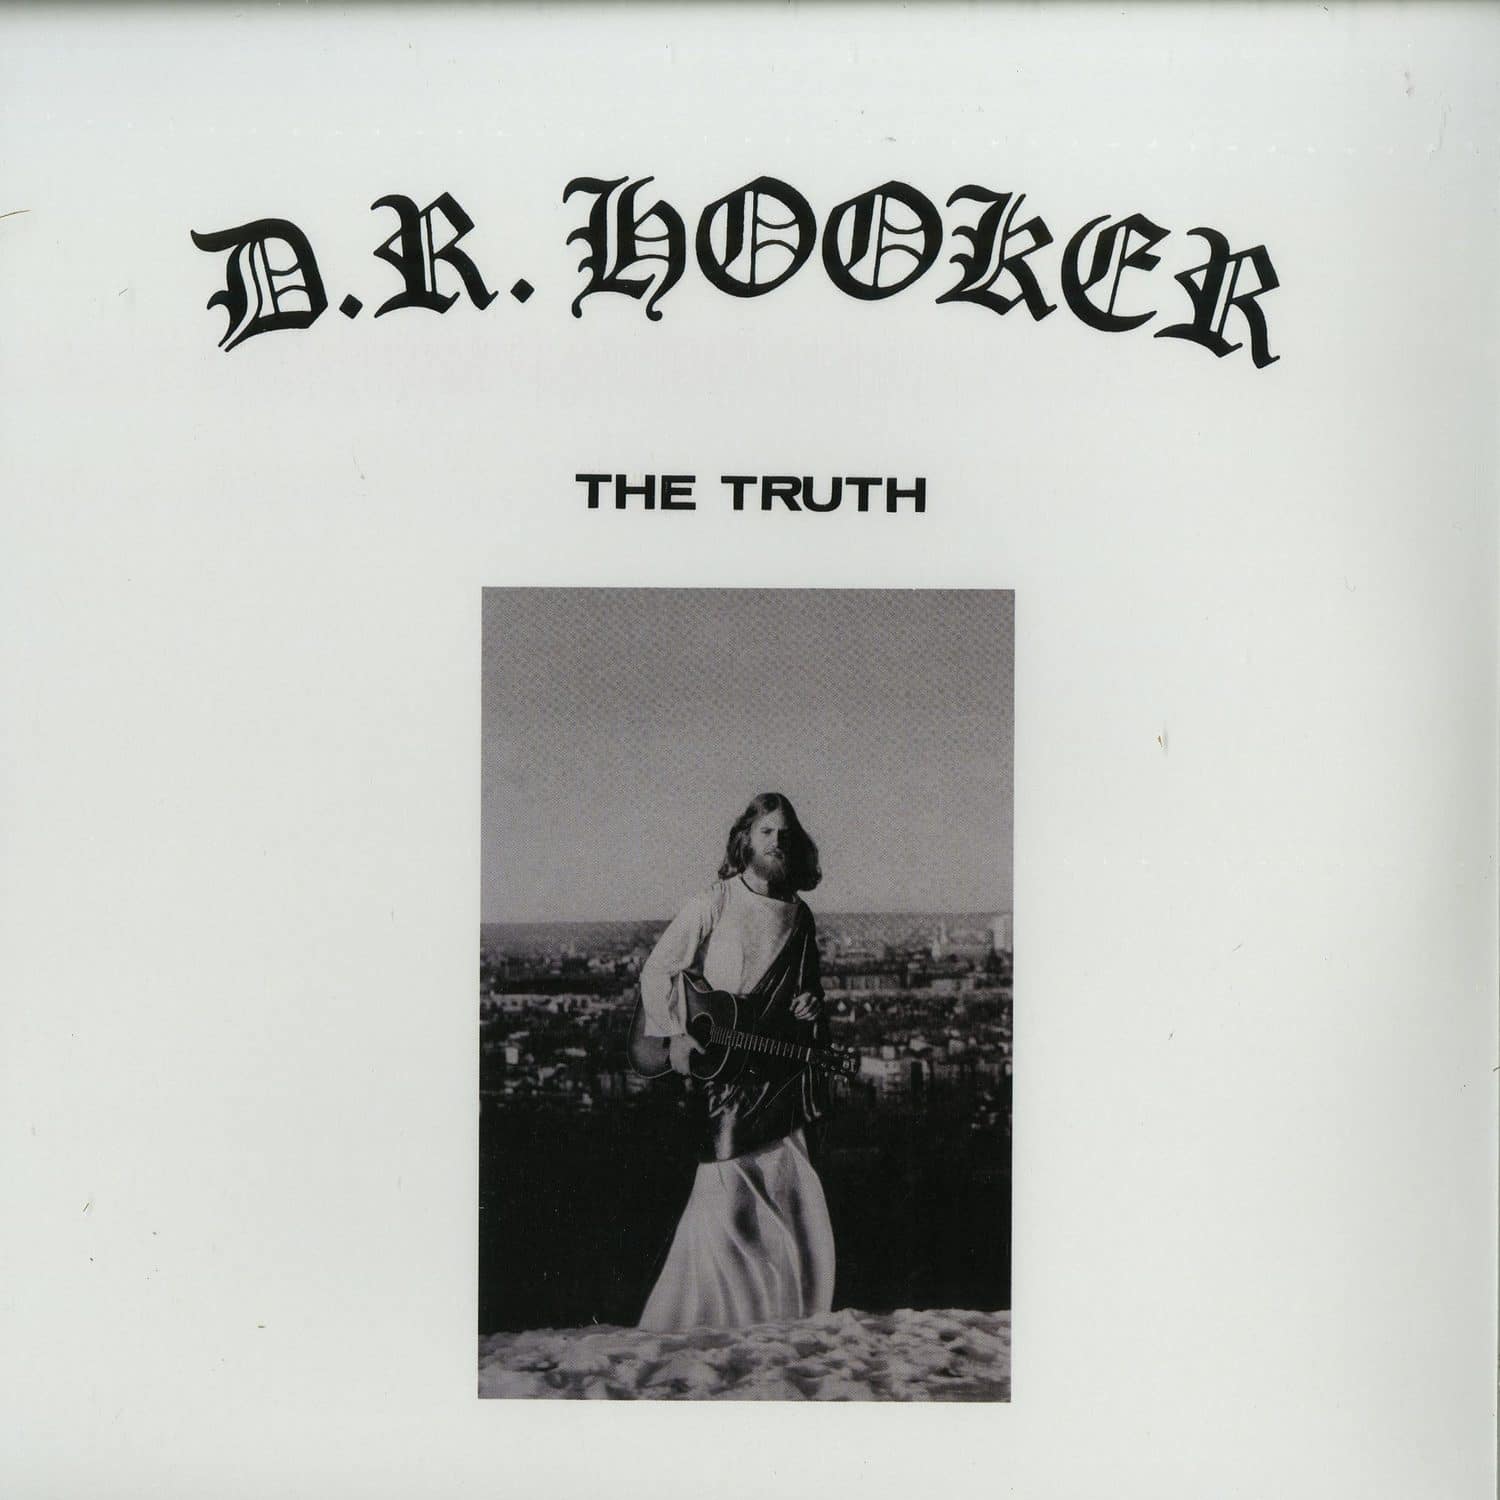 Dr Hooker - THE TRUTH 